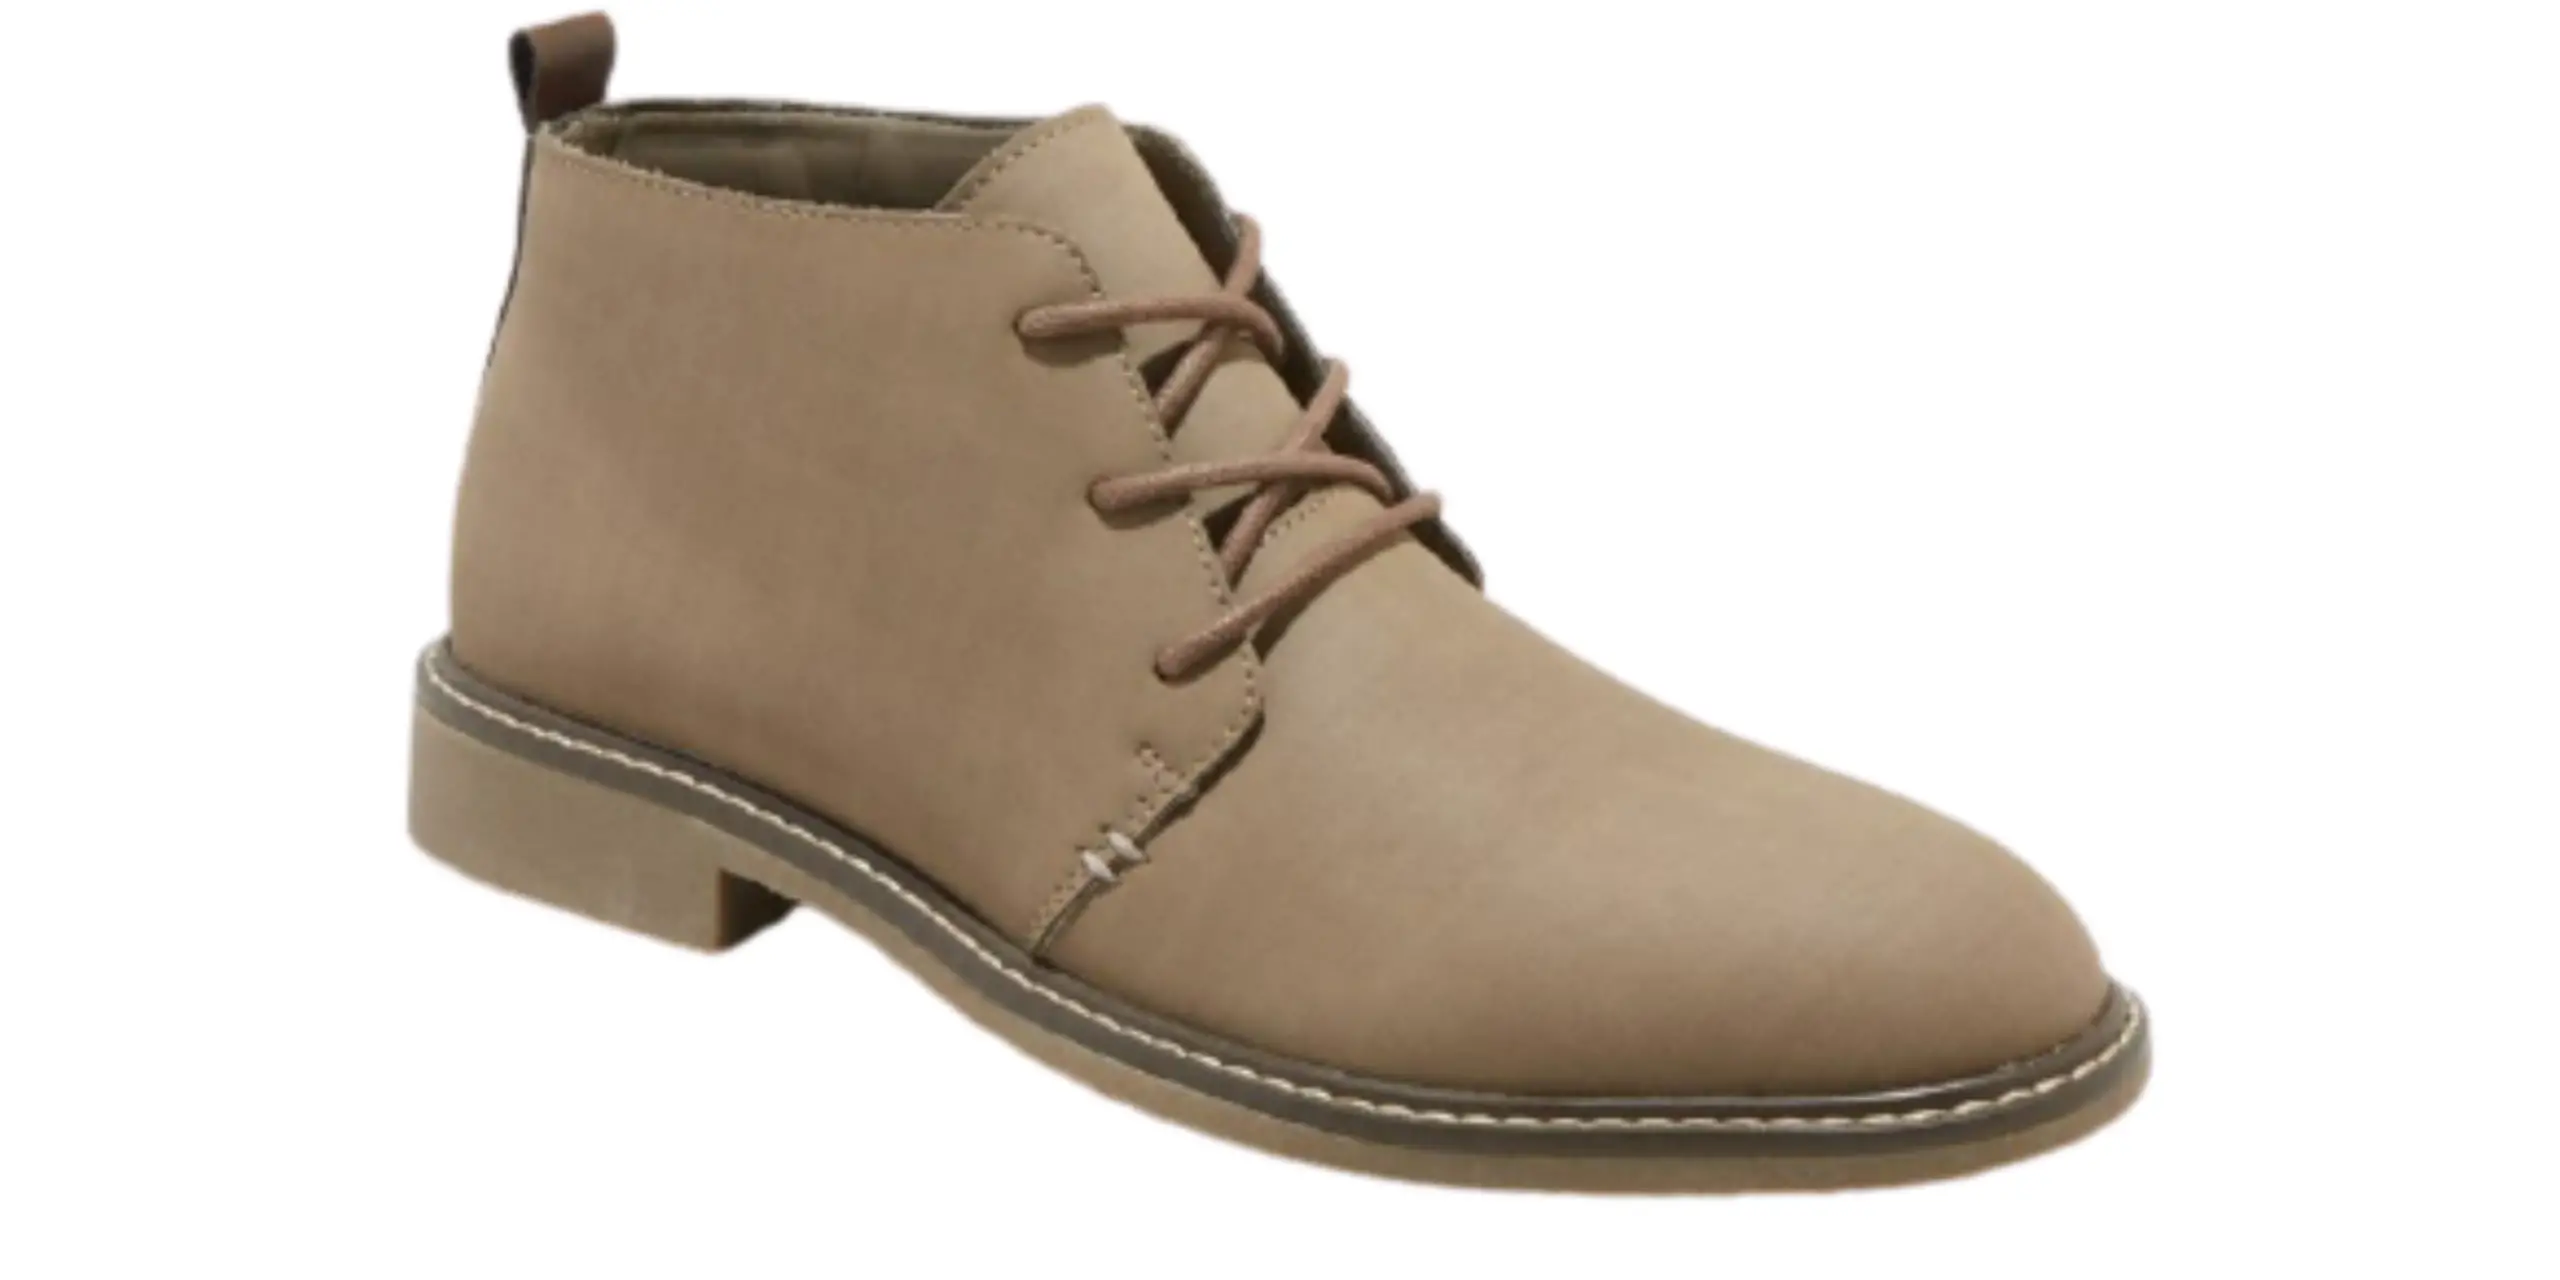 Chukka Shoe — Types of Men's Formal Shoes